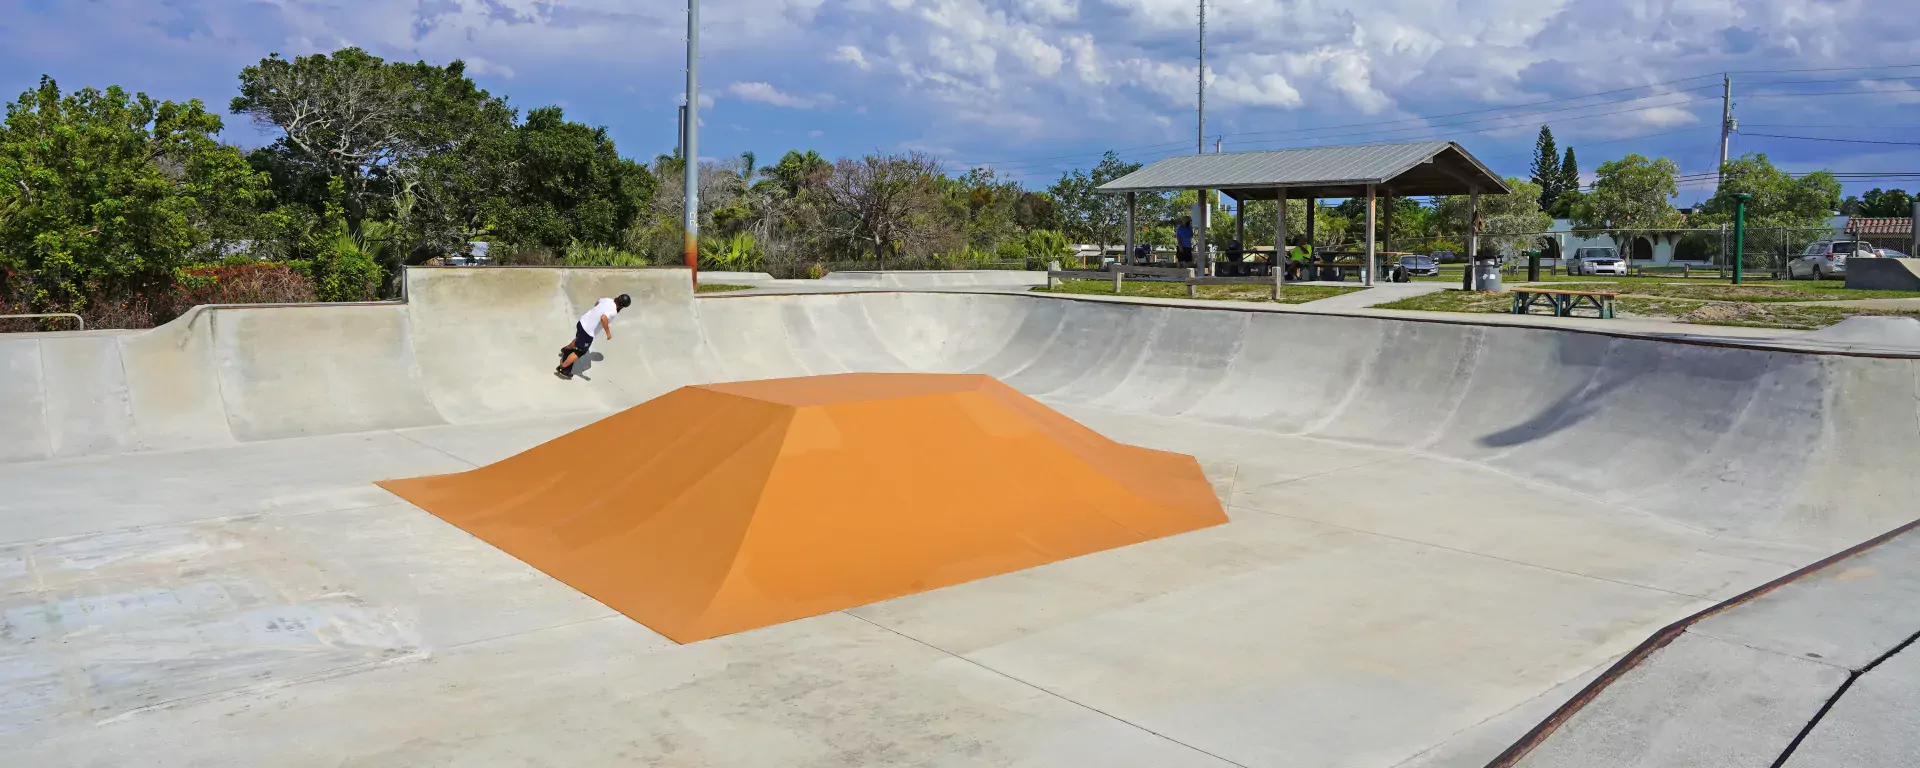 Rio skate park feature with bowl